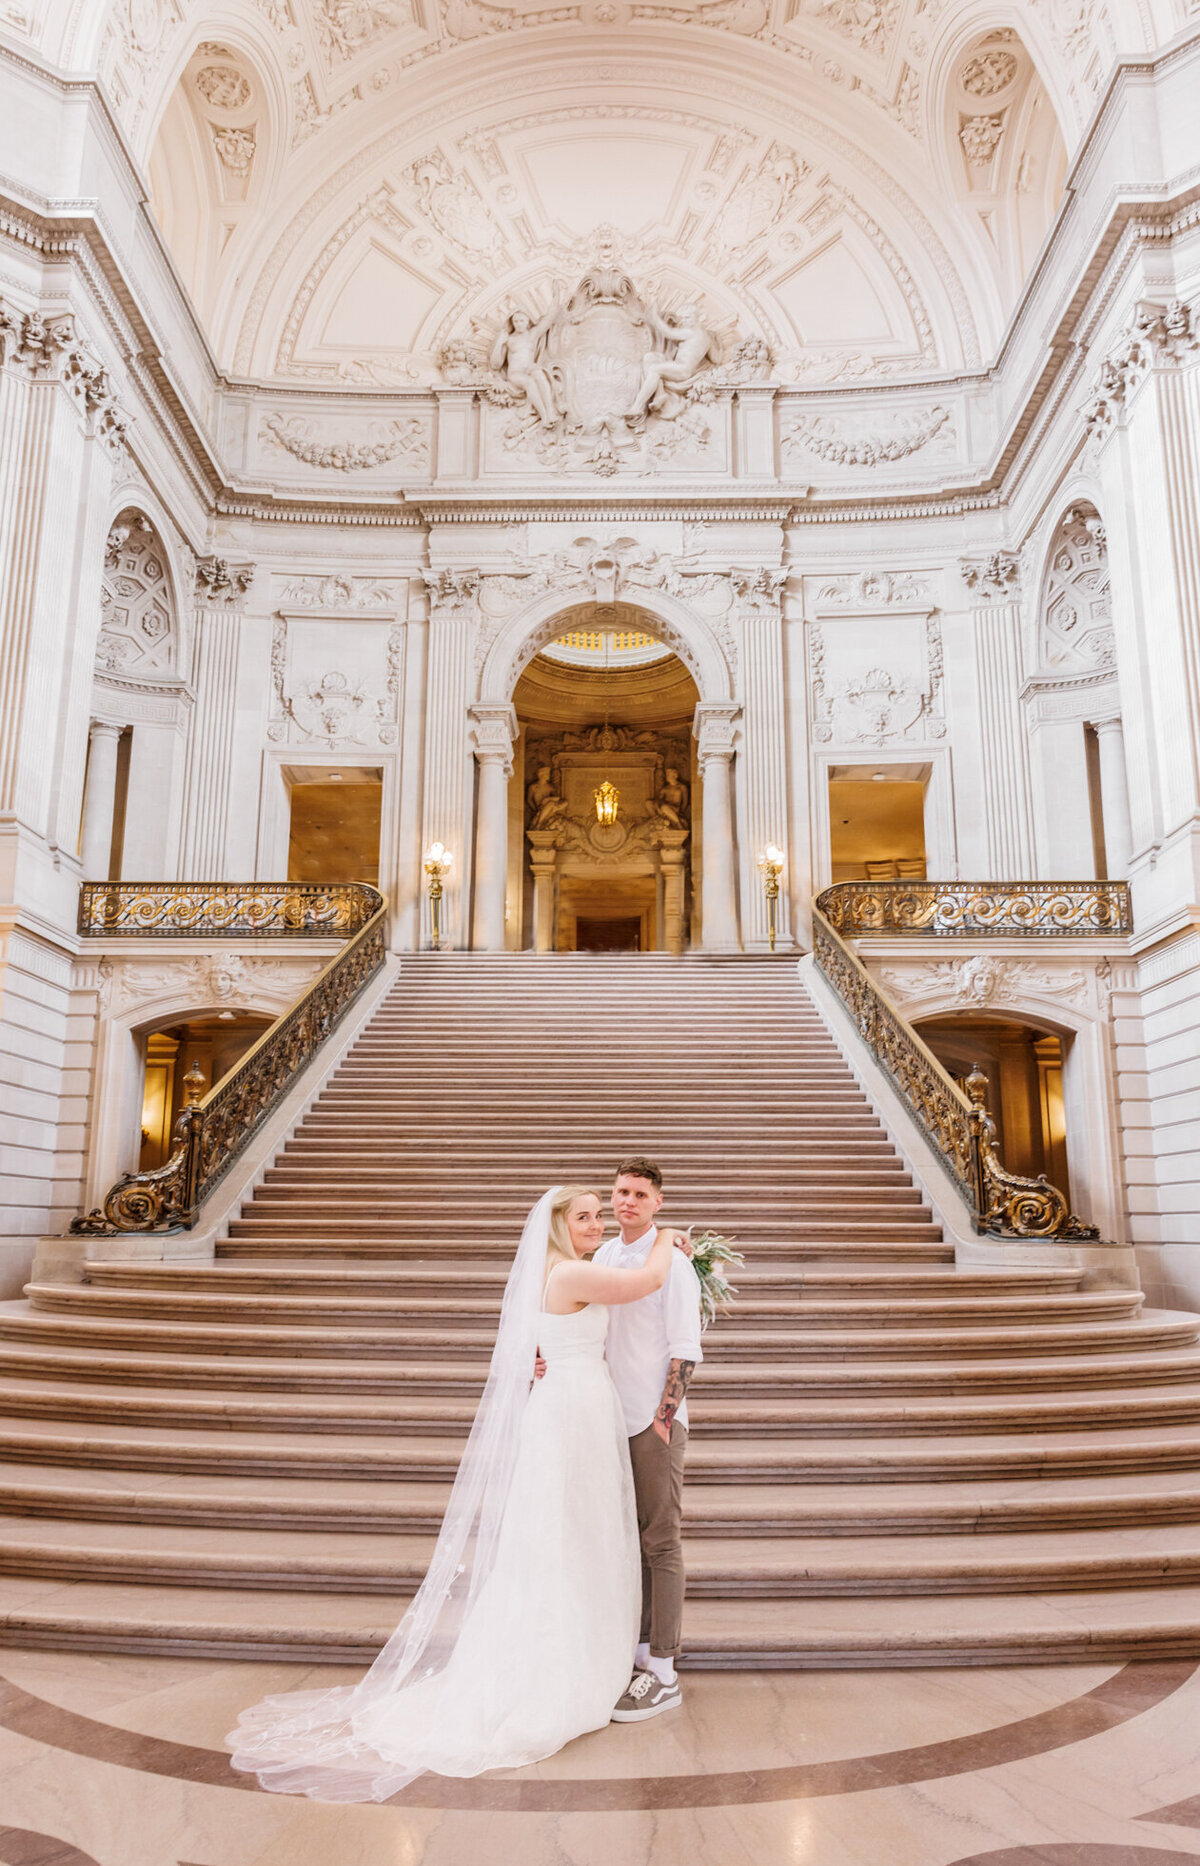 Perrie + Victoria-Elopement-San Francisco City Hall-Emily Pillon Photography-S-051723-2-2